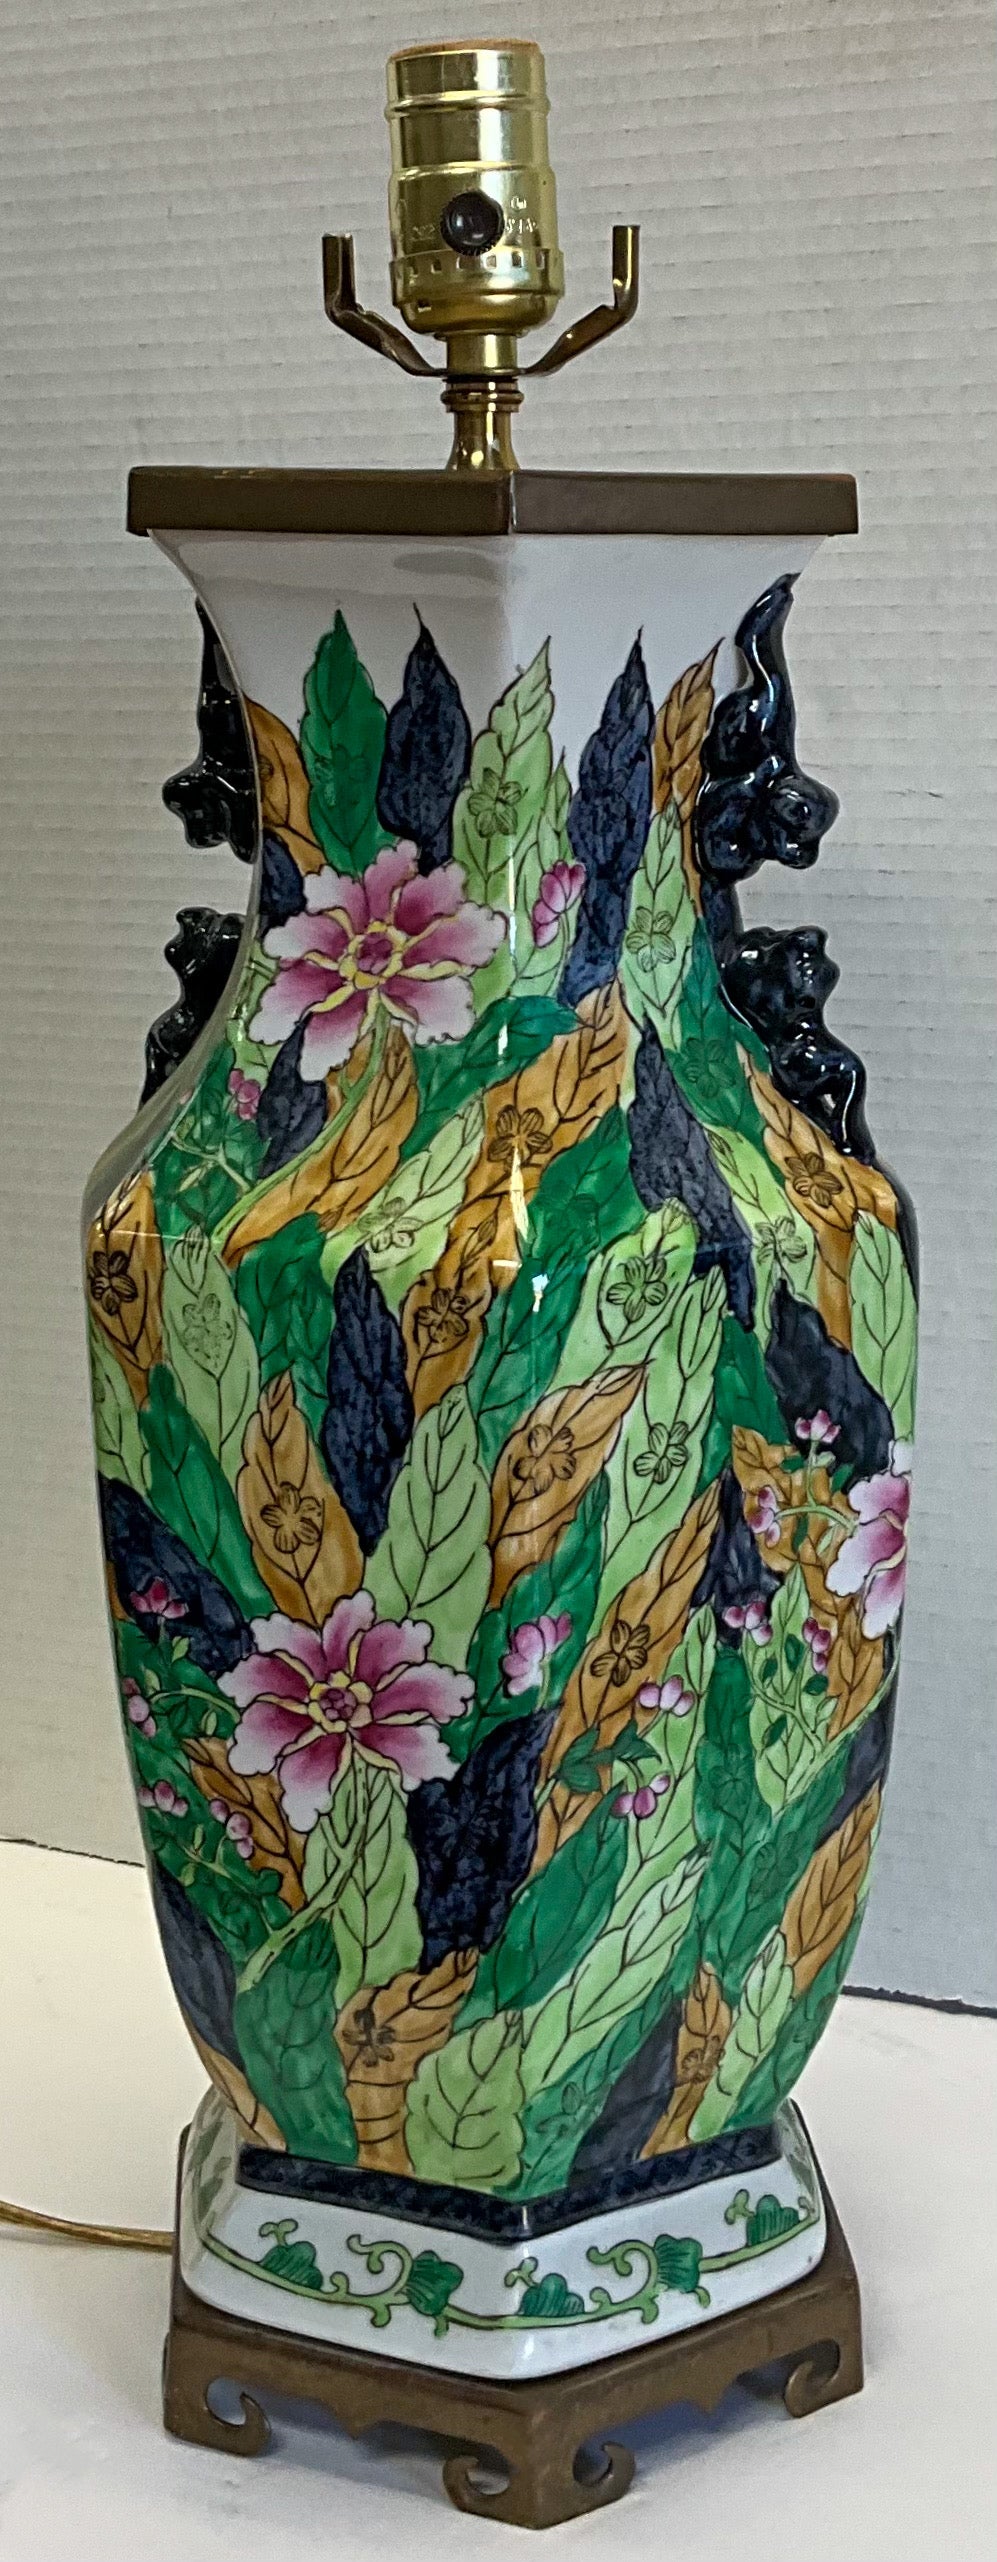 This is a Chinese Export style porcelain table lamp in the vibrant tobacco leaf pattern. The wiring is new, and it is mounted to a brass base. It is unmarked.